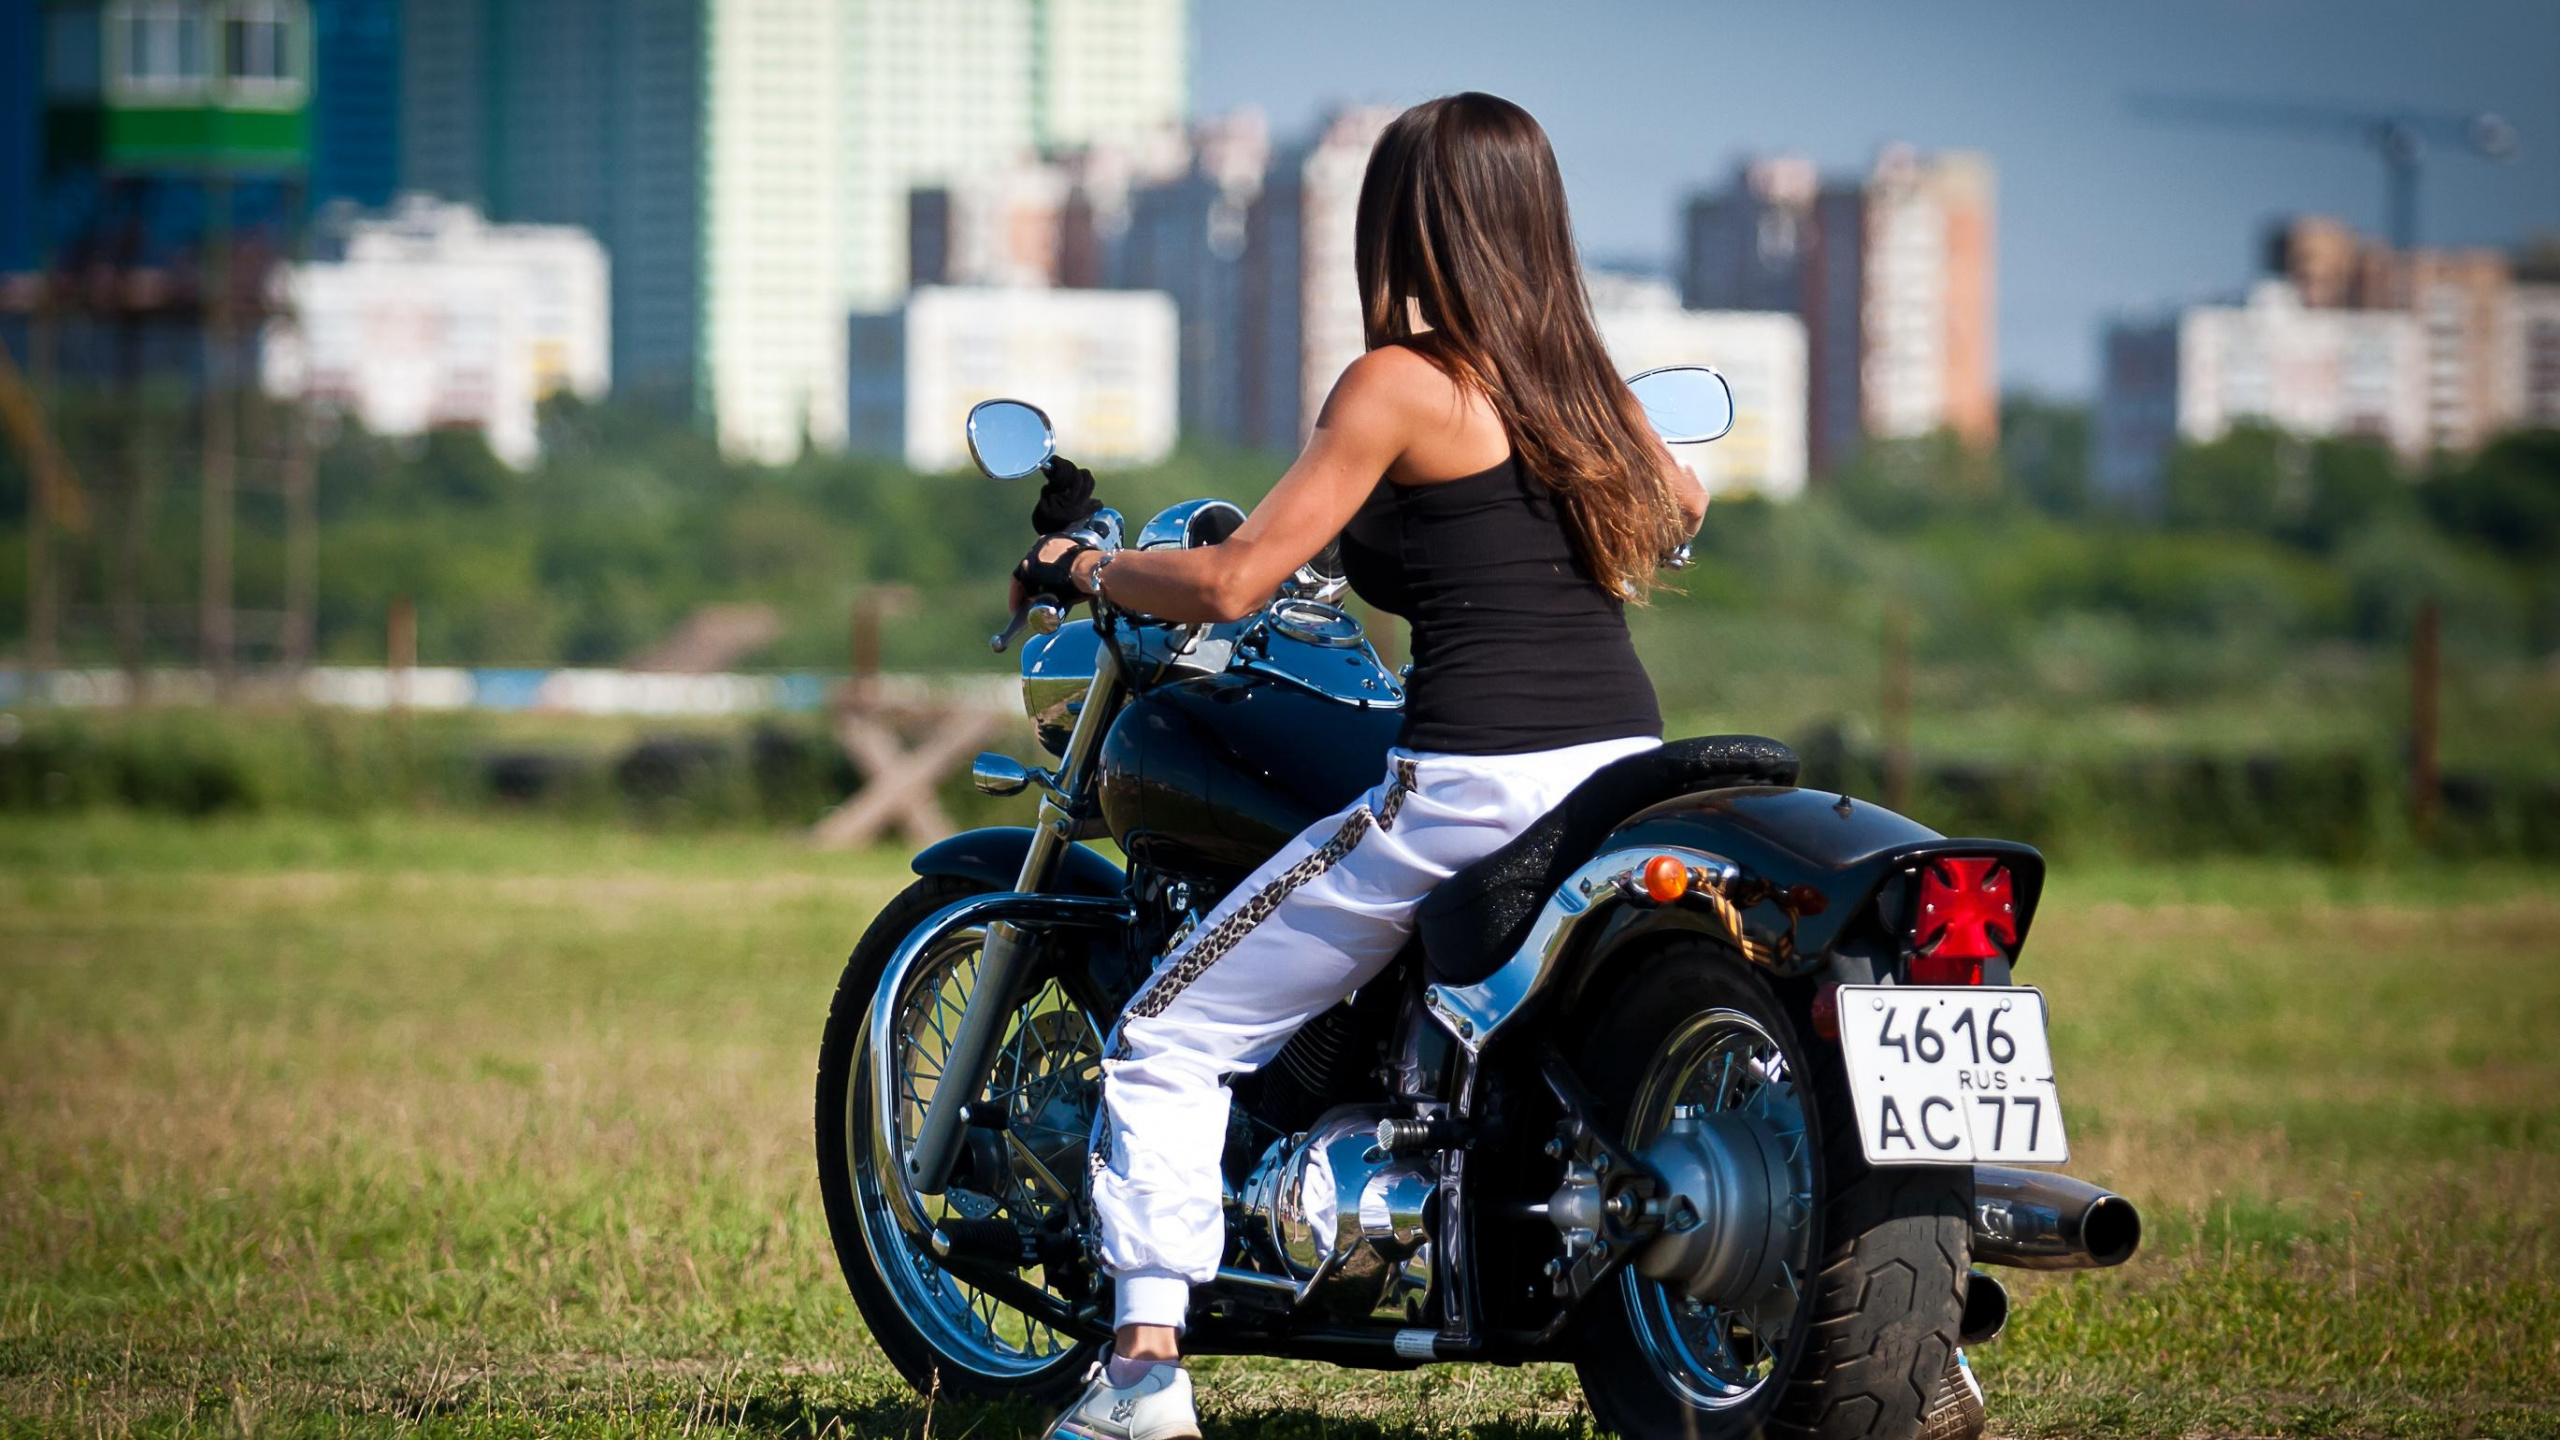 Woman in Blue Tank Top Riding on Black and White Motorcycle During Daytime. Wallpaper in 2560x1440 Resolution